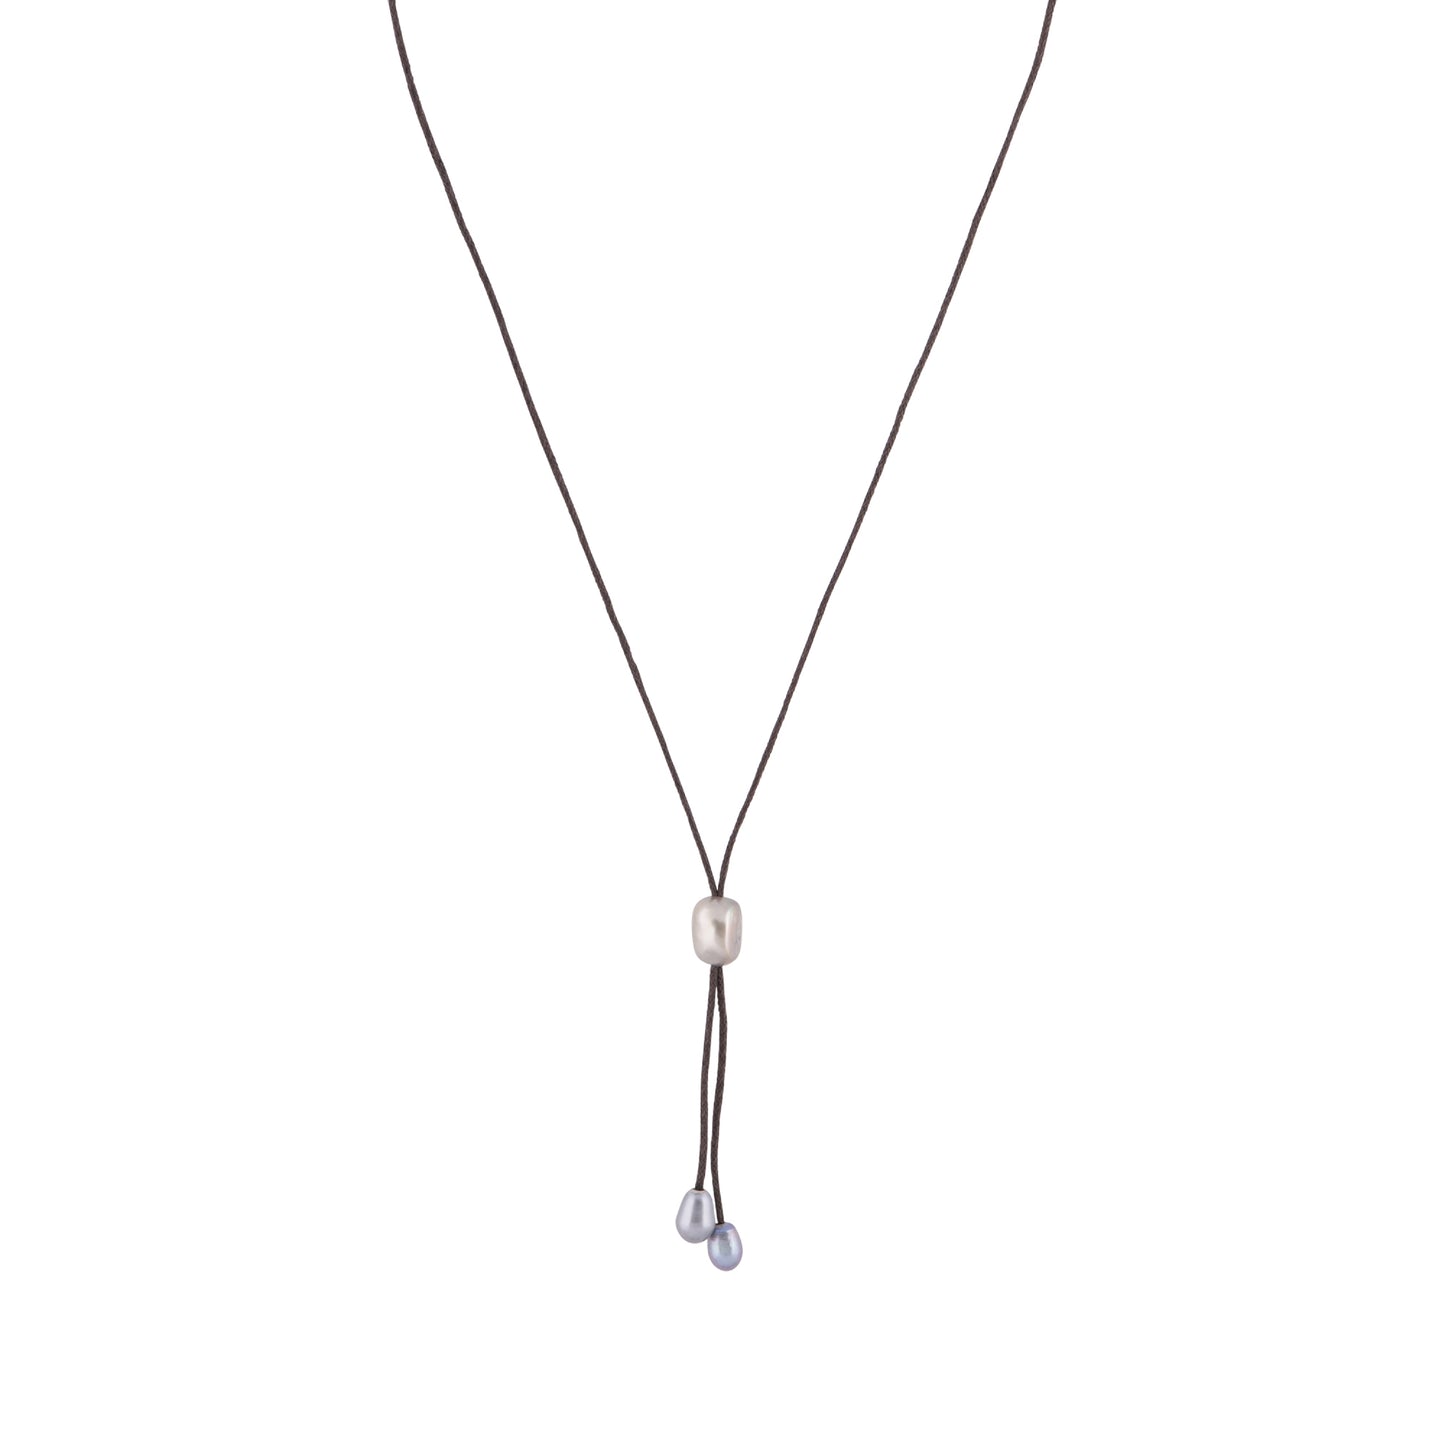 Lily - Freshwater pearl bolo tie (Dark brown strand, silver pearls)